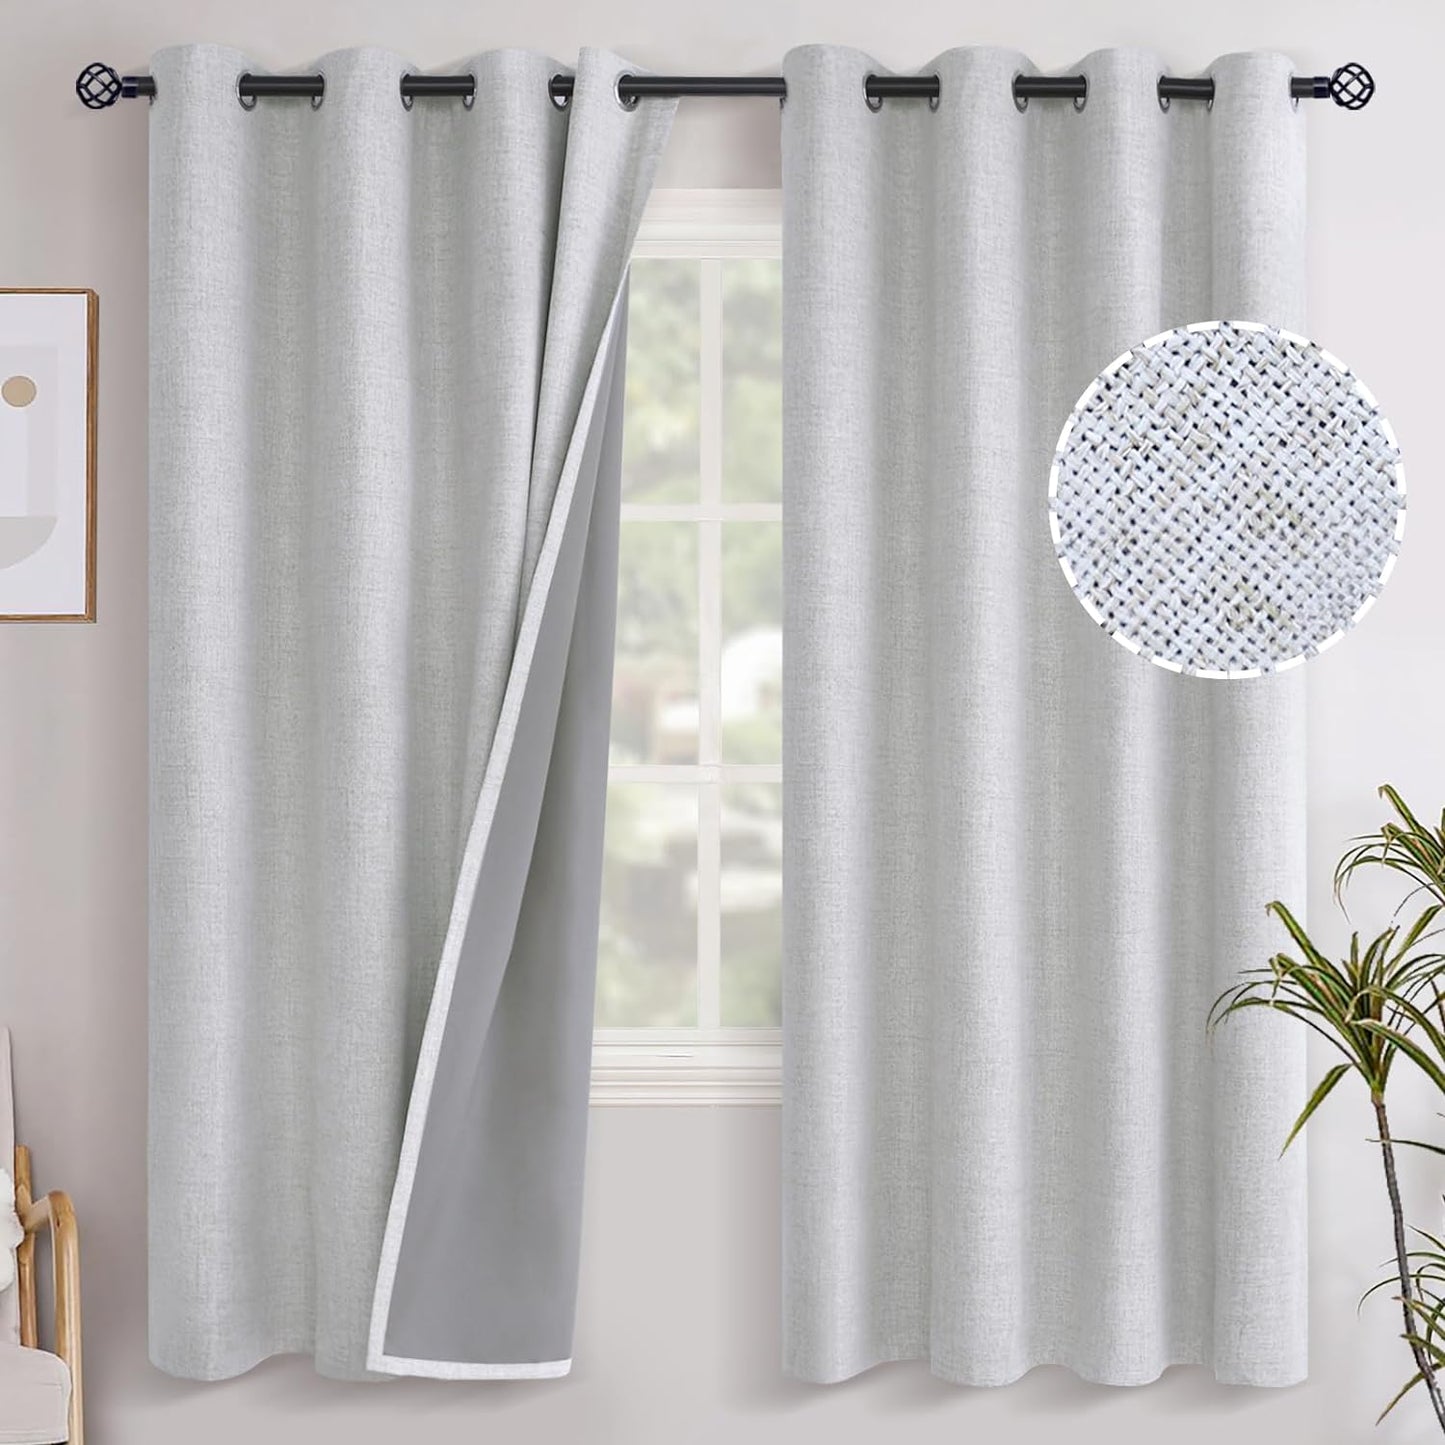 Youngstex Linen Blackout Curtains 63 Inch Length, Grommet Darkening Bedroom Curtains Burlap Linen Window Drapes Thermal Insulated for Basement Summer Heat, 2 Panels, 52 X 63 Inch, Beige  YoungsTex Linen 52W X 72L 